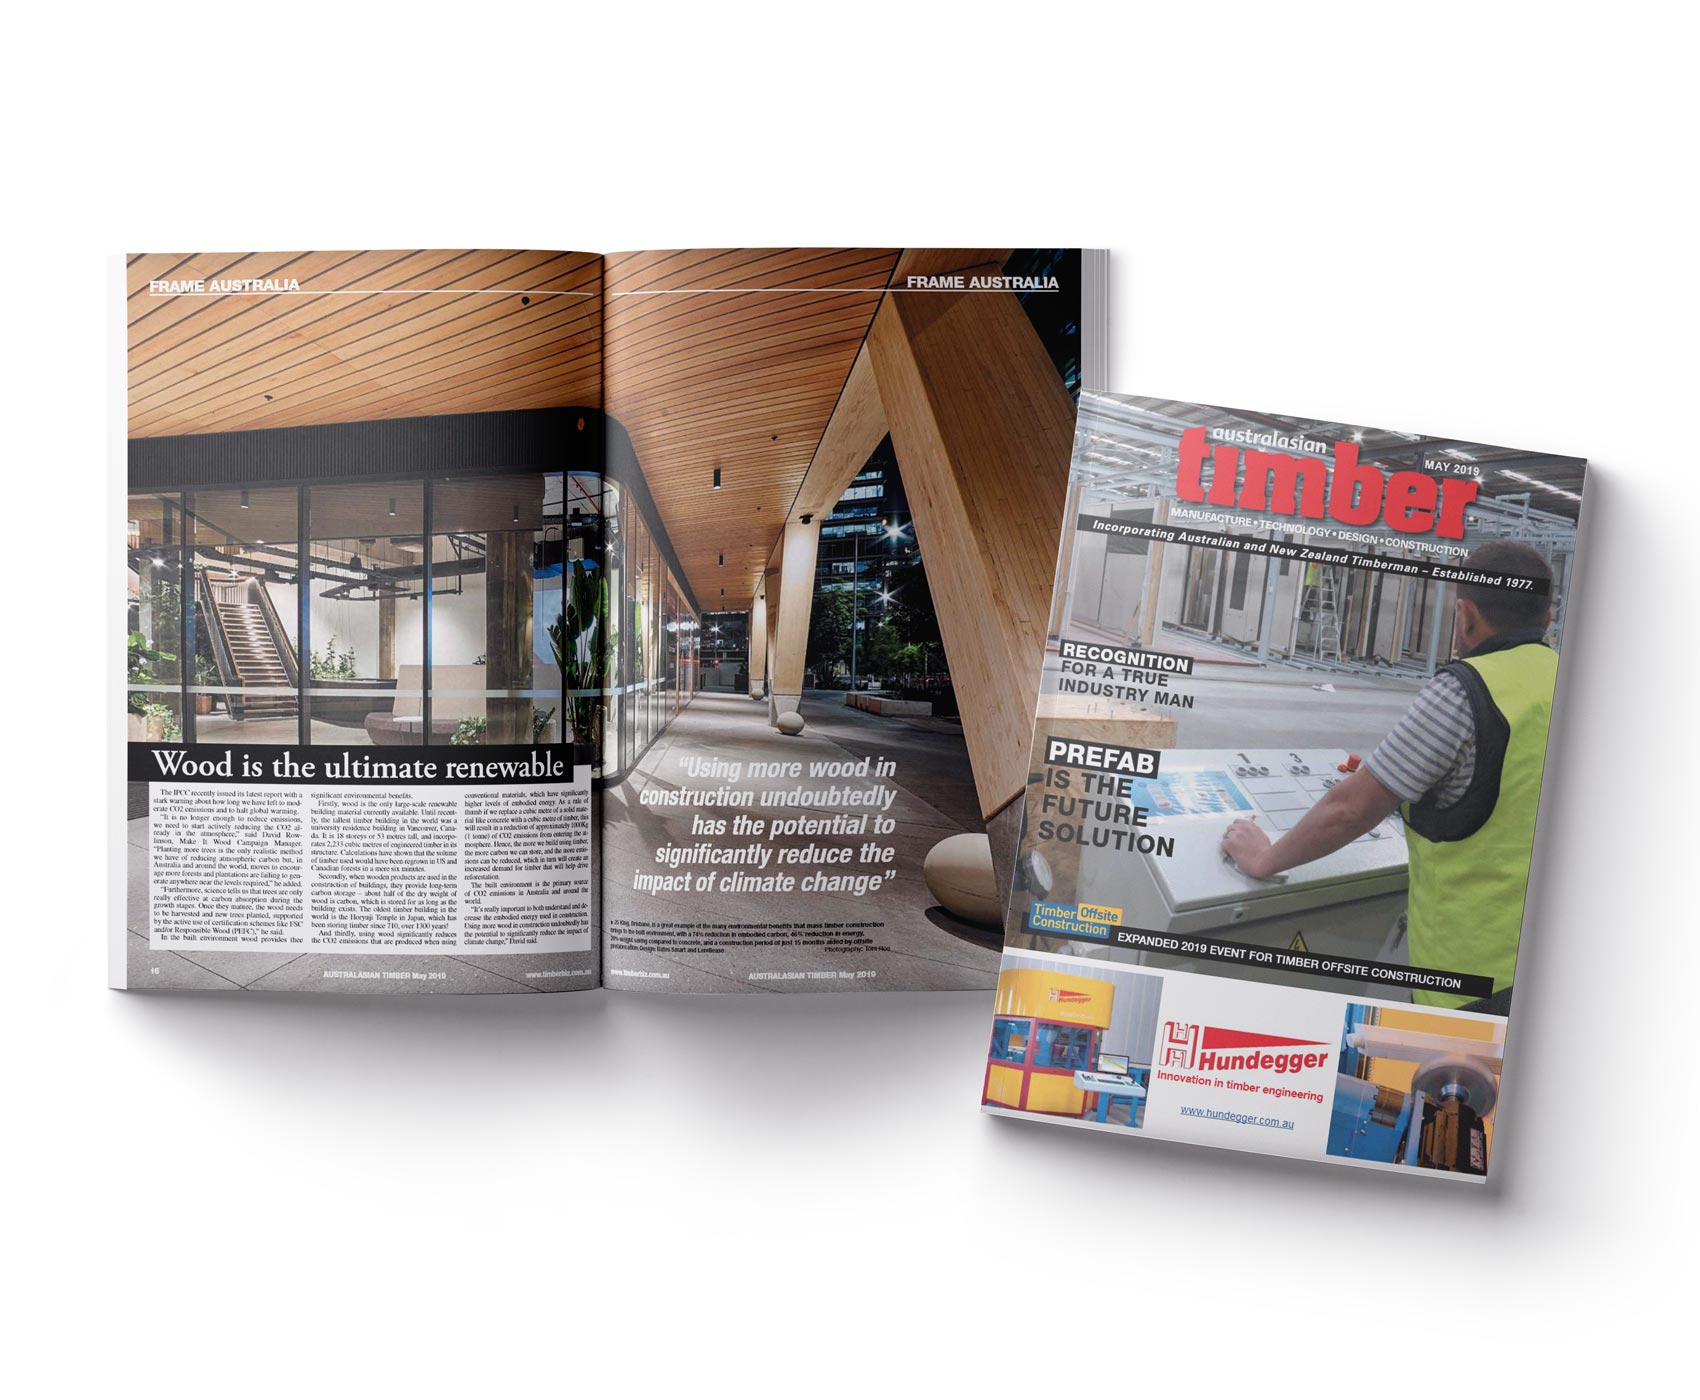 Australasian Timber Magazine (ATM) May 2019 Cover and Inside Spread